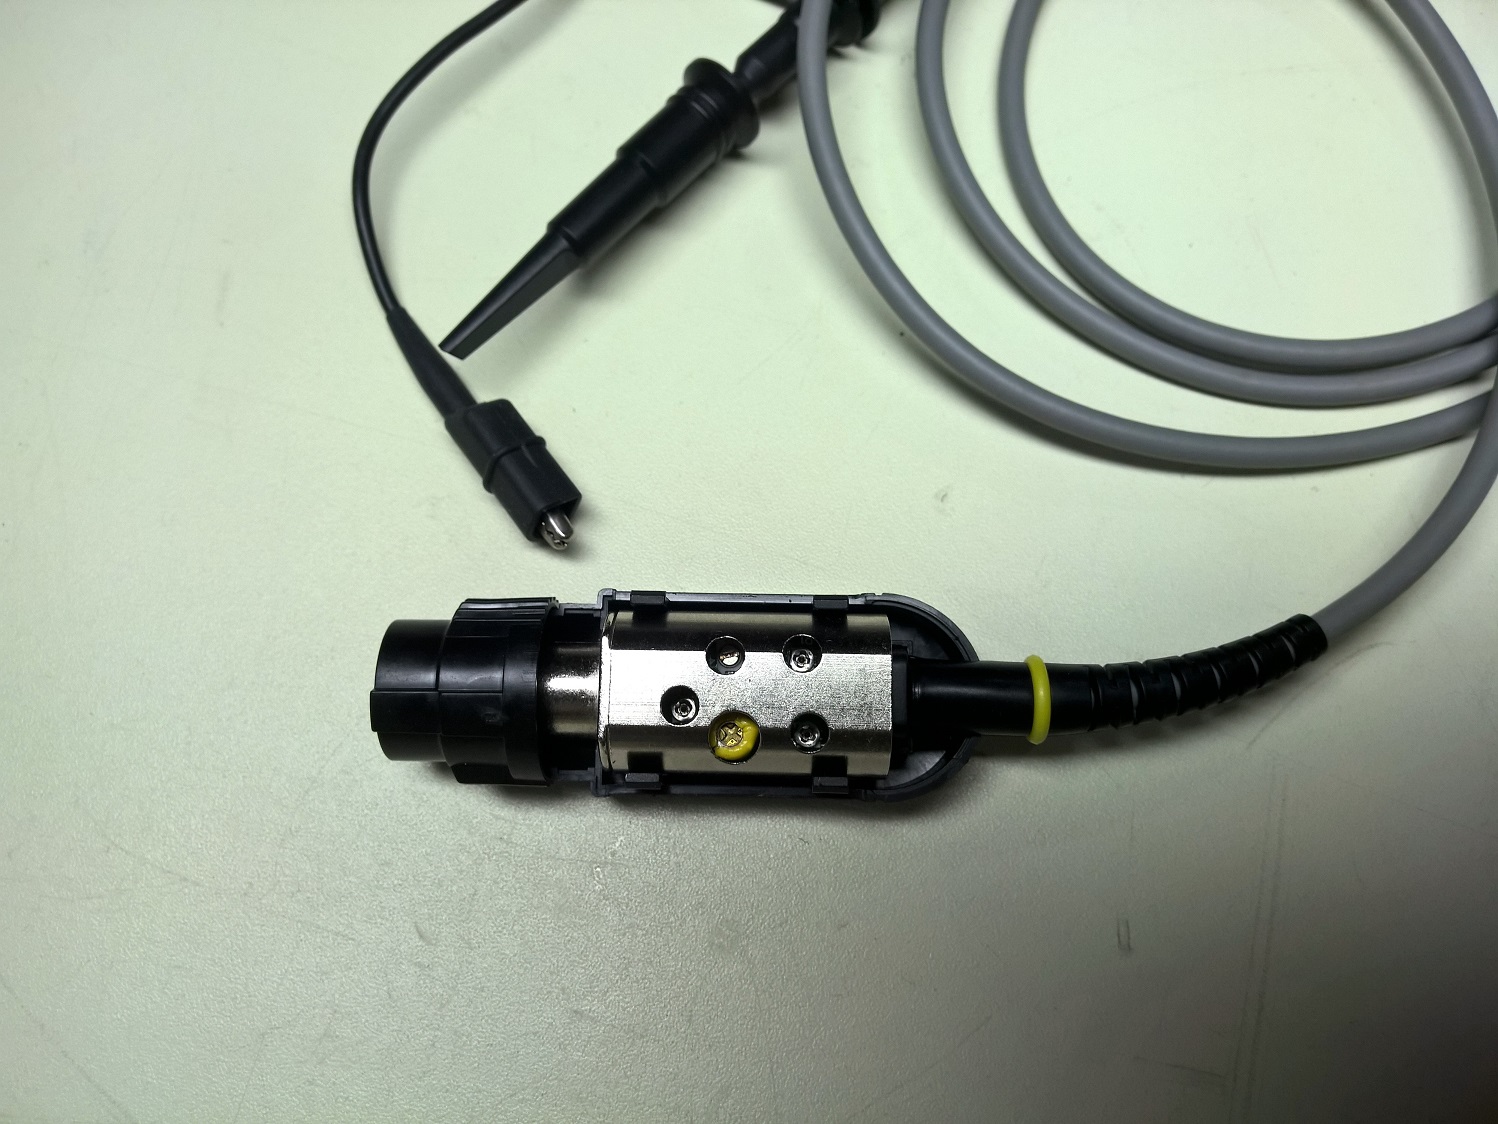 Details about   Lead Was Cut Tektronix P7240 4.0 GHz Active Probe For Get Repair Parts 